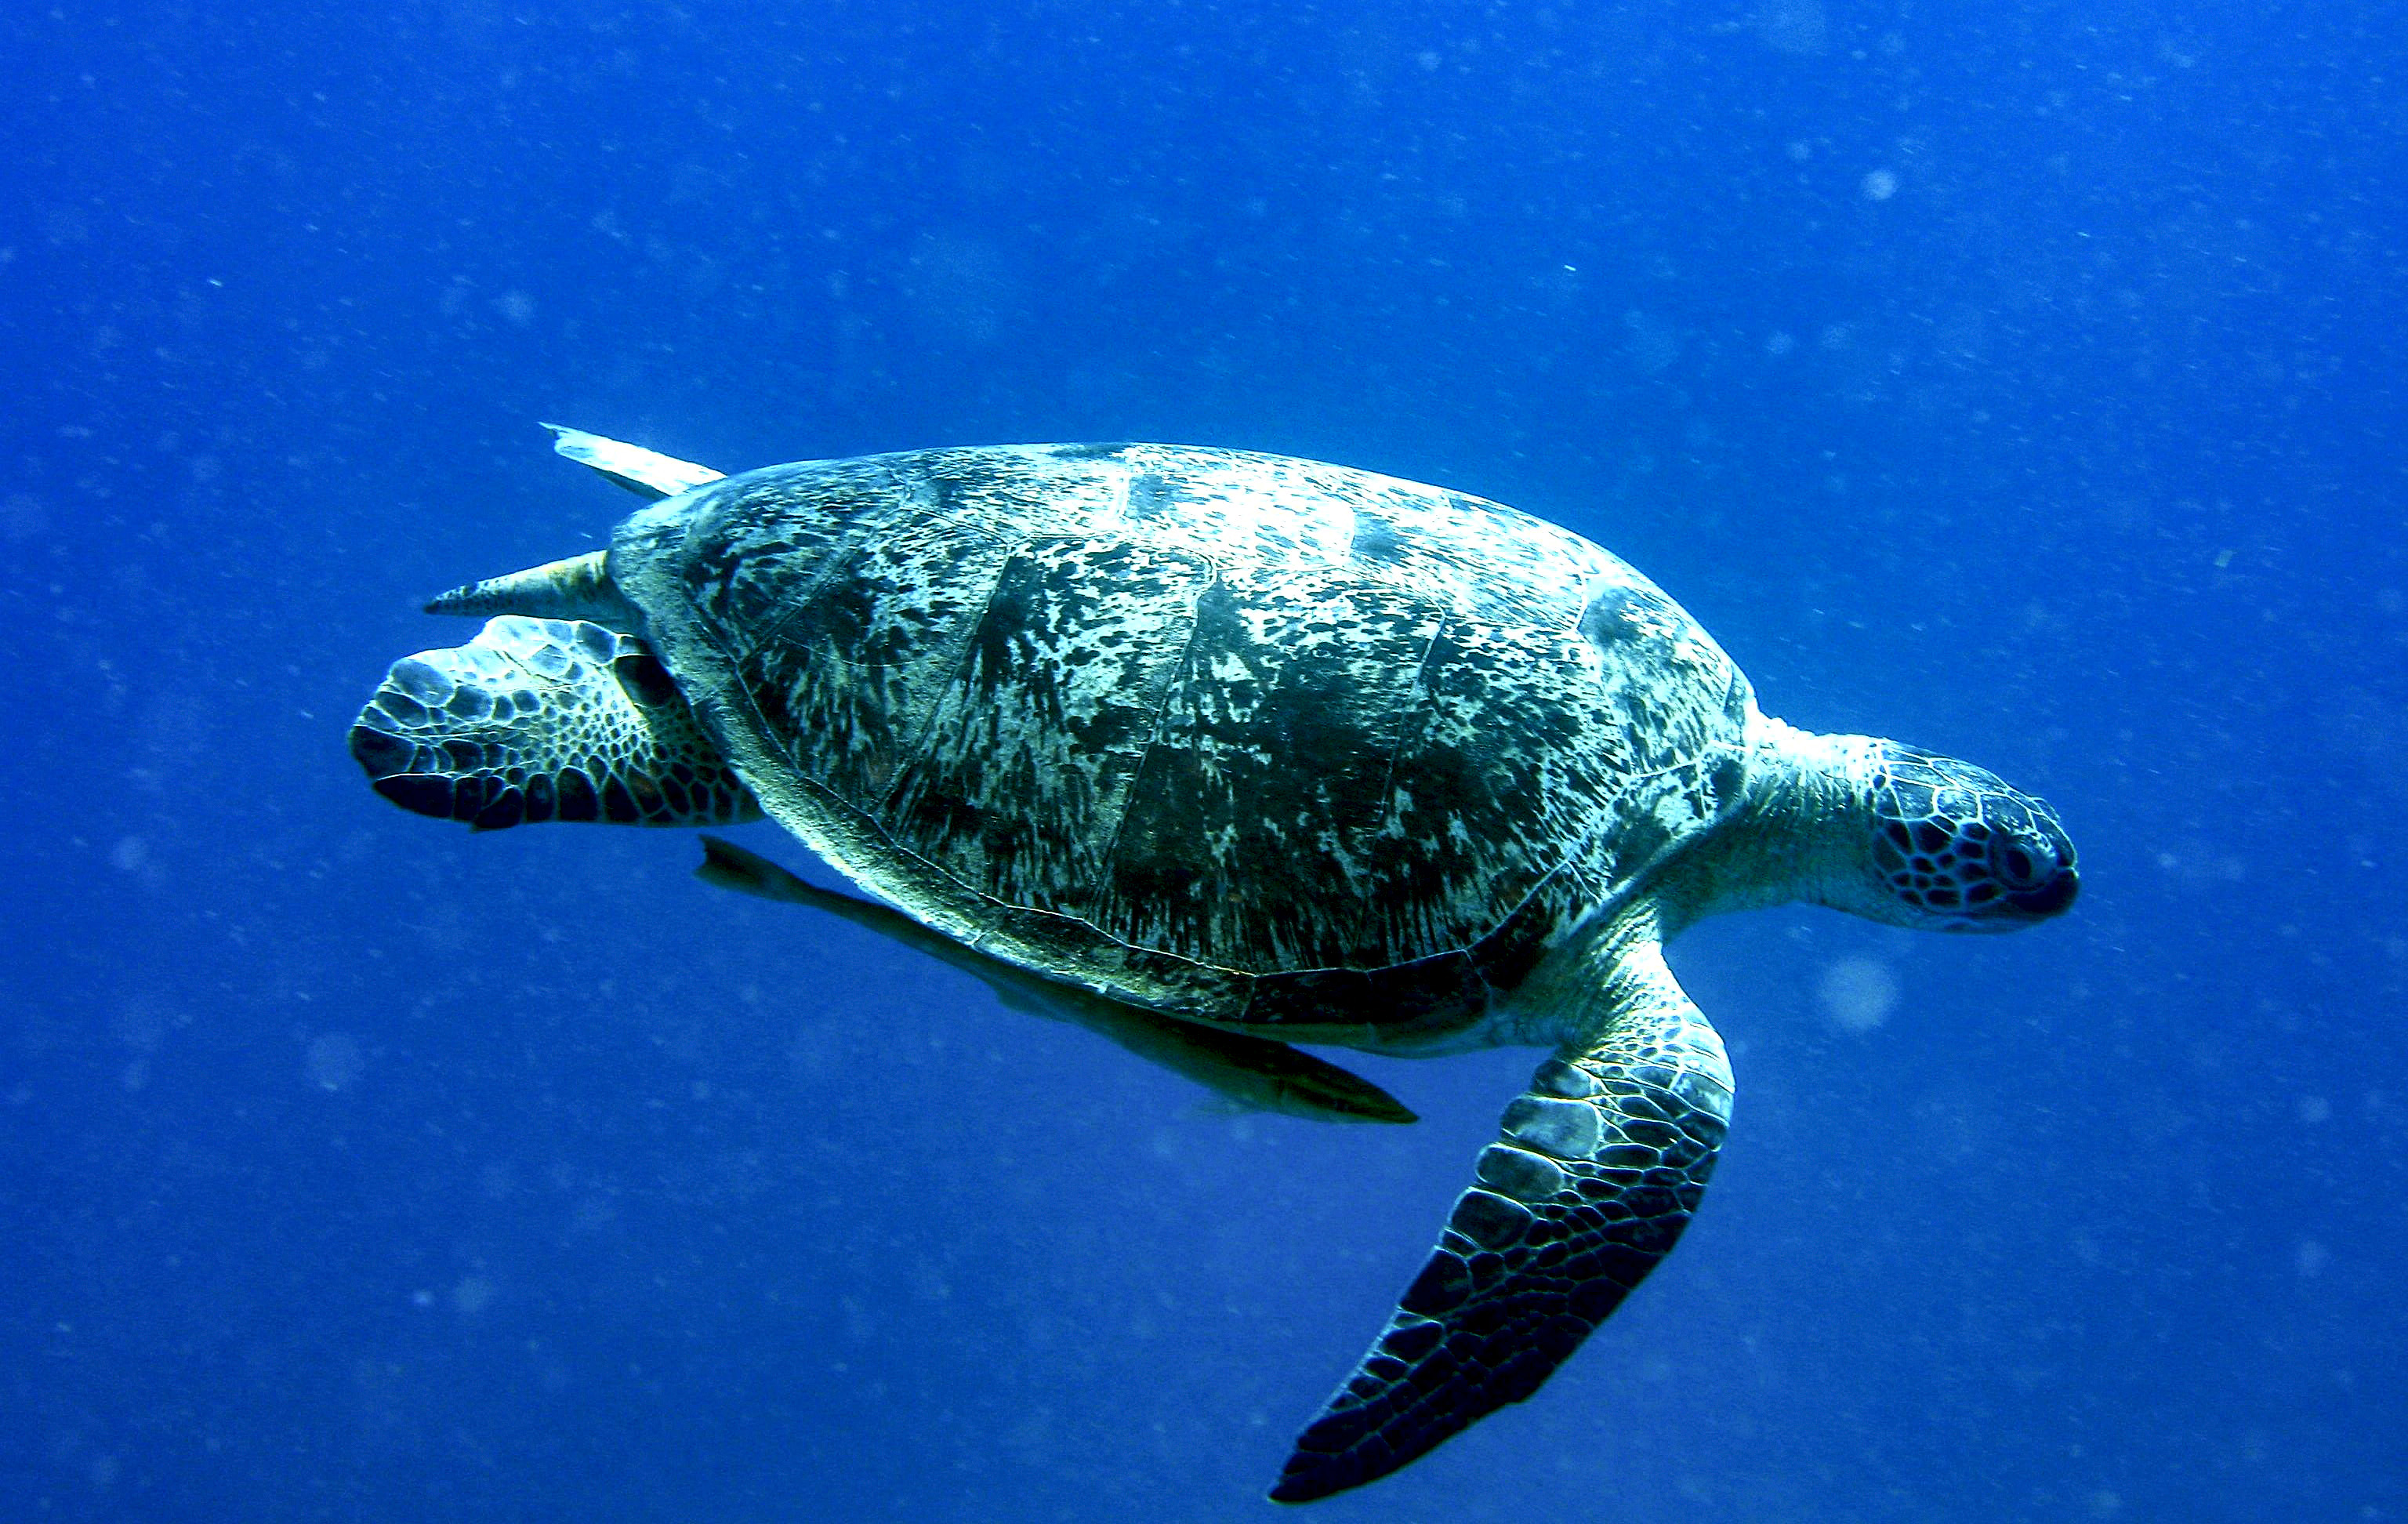 Green sea turtle and accompanying fish (picture detail)